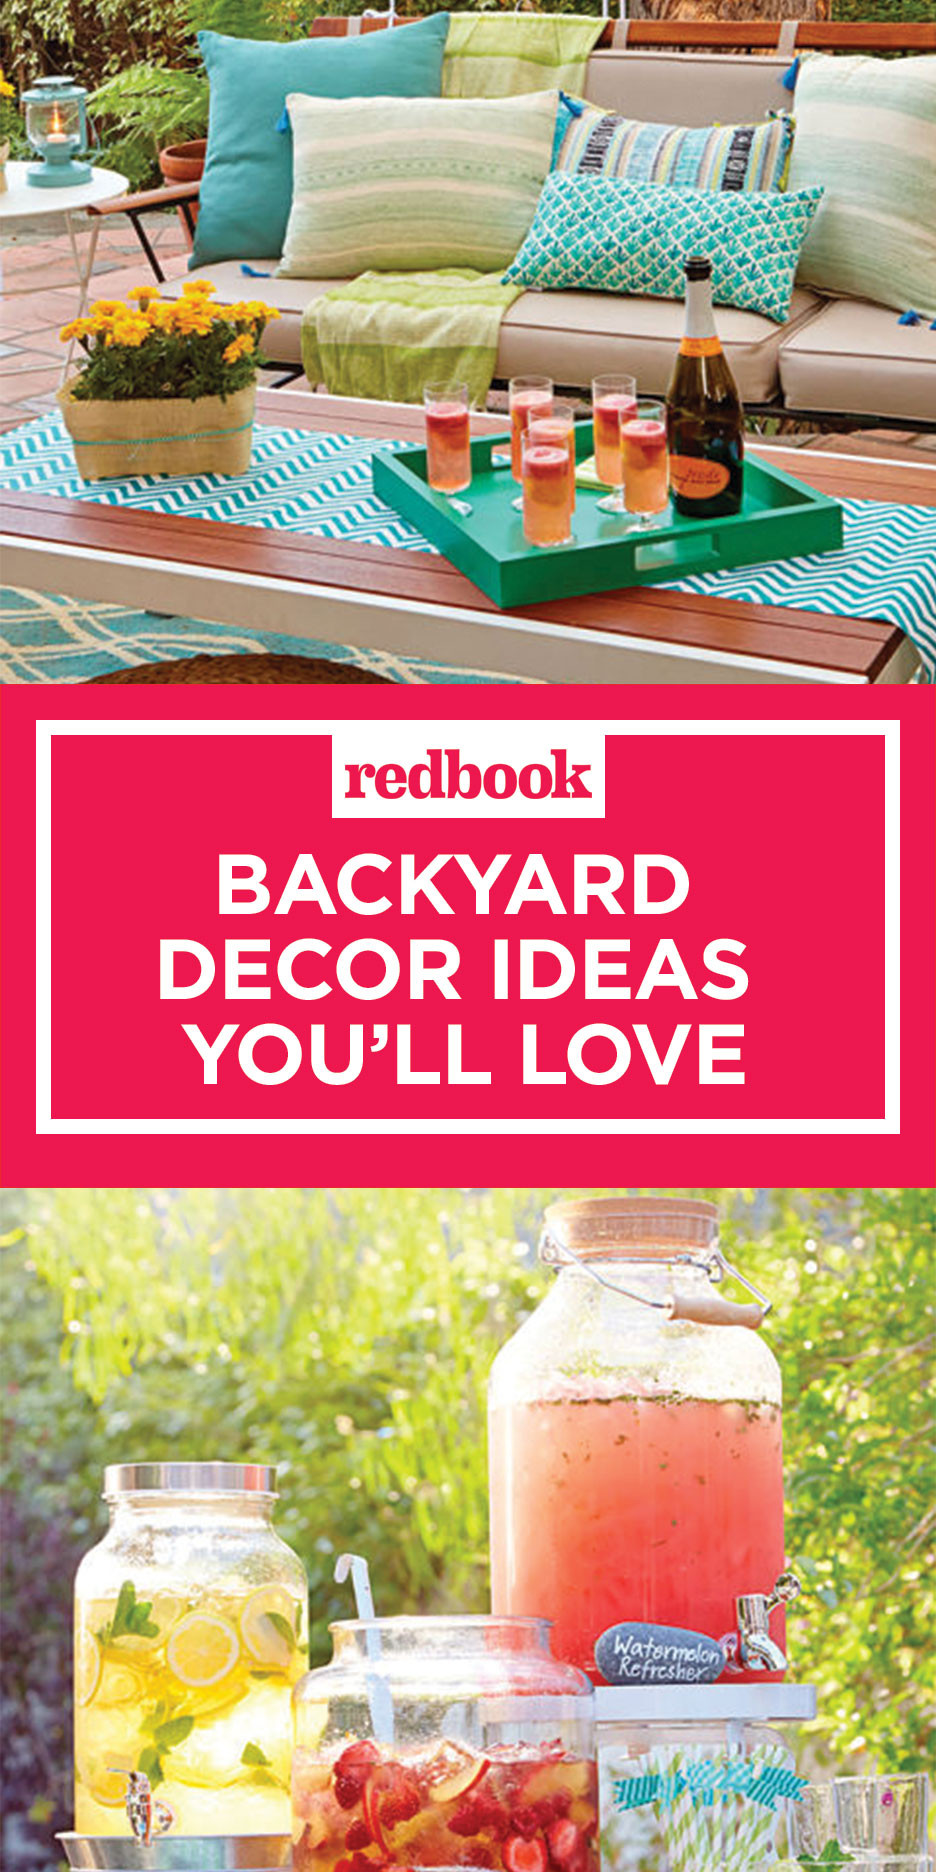 Adult Summer Party Ideas
 14 Best Backyard Party Ideas for Adults Summer